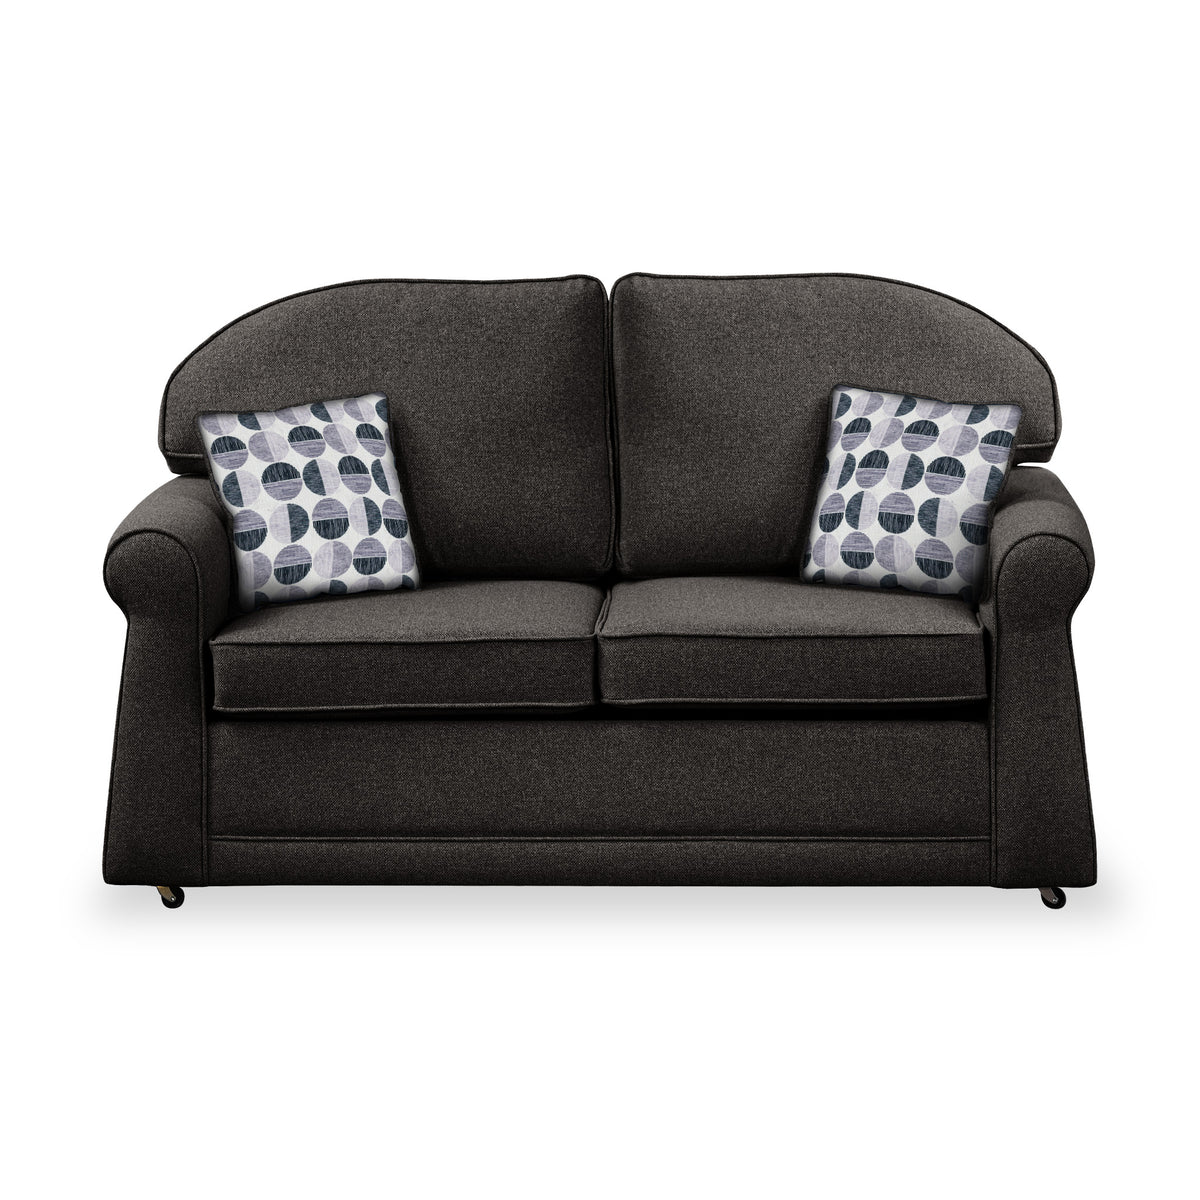 Croxdon Charcoal Faux Linen 2 Seater Sofabed with Mono Scatter Cushions from Roseland Furniture